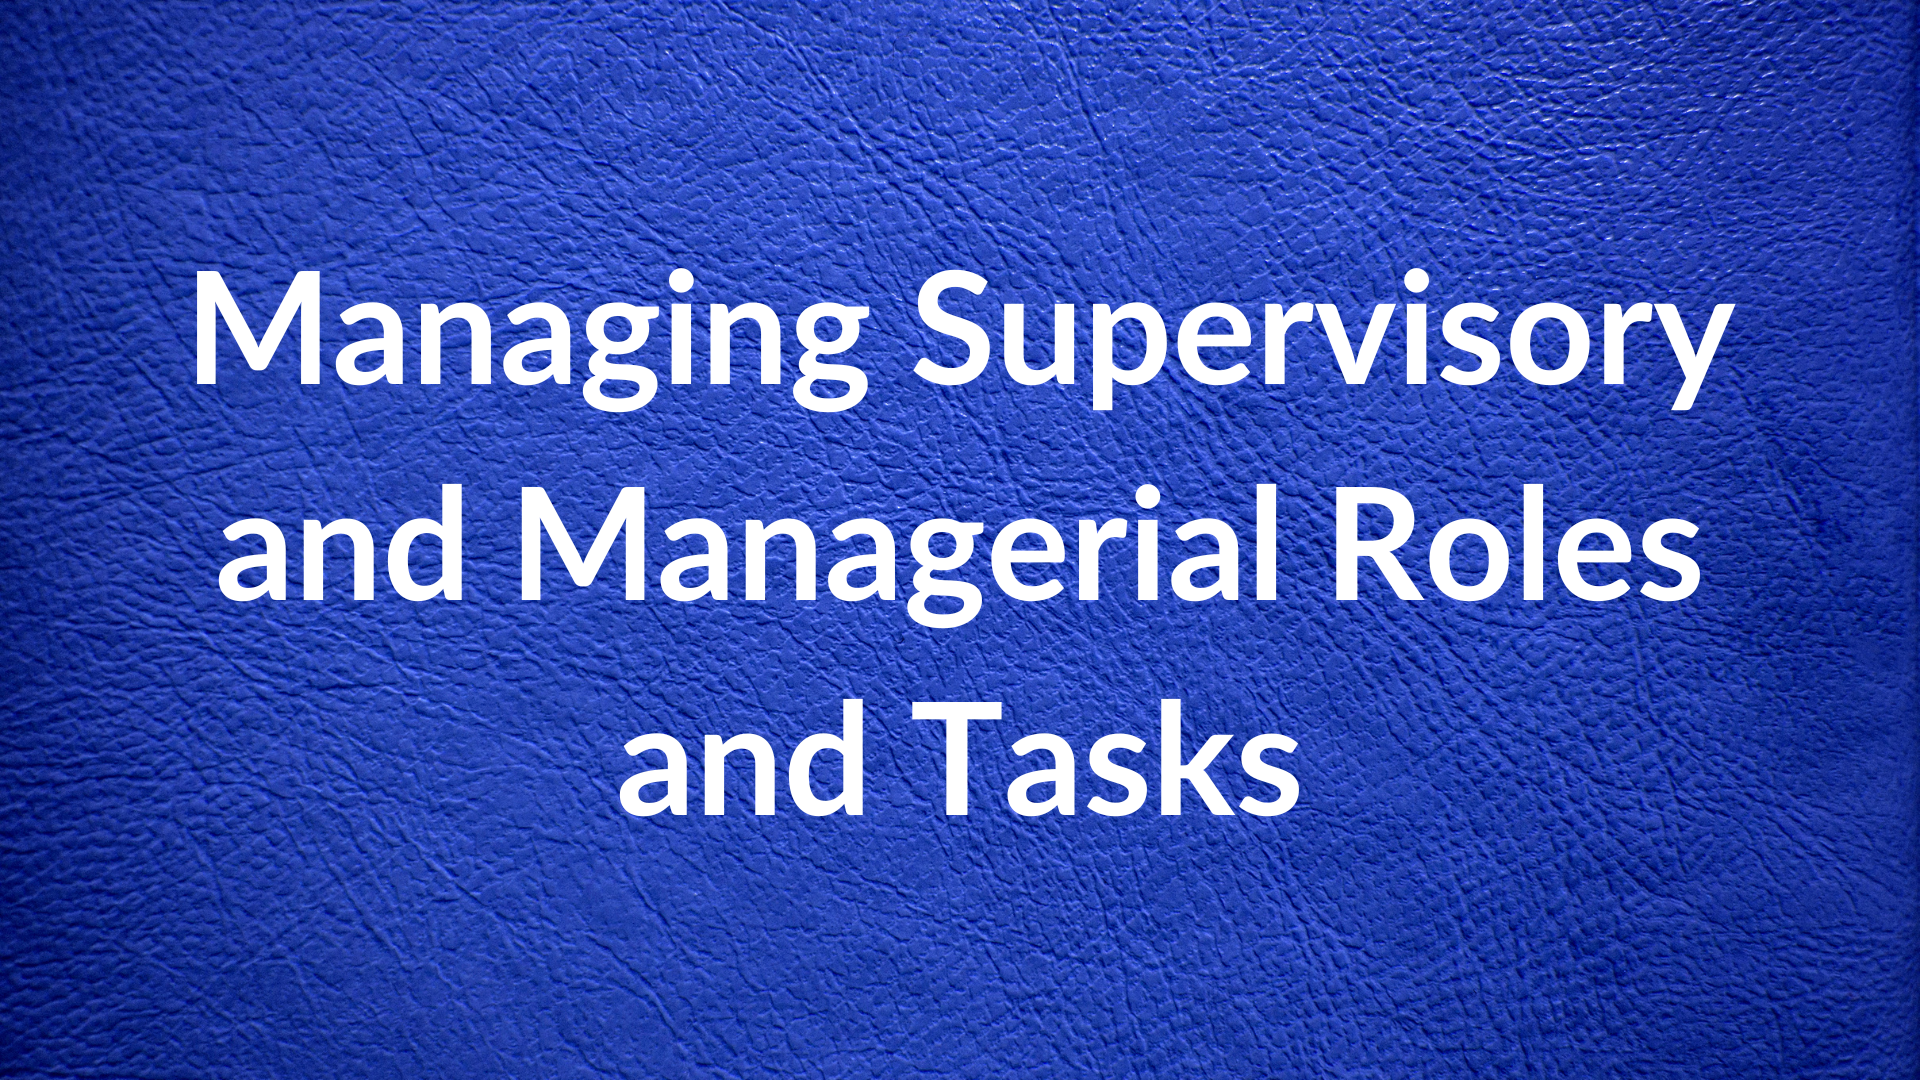 Managing Supervisory and Managerial Roles and Tasks